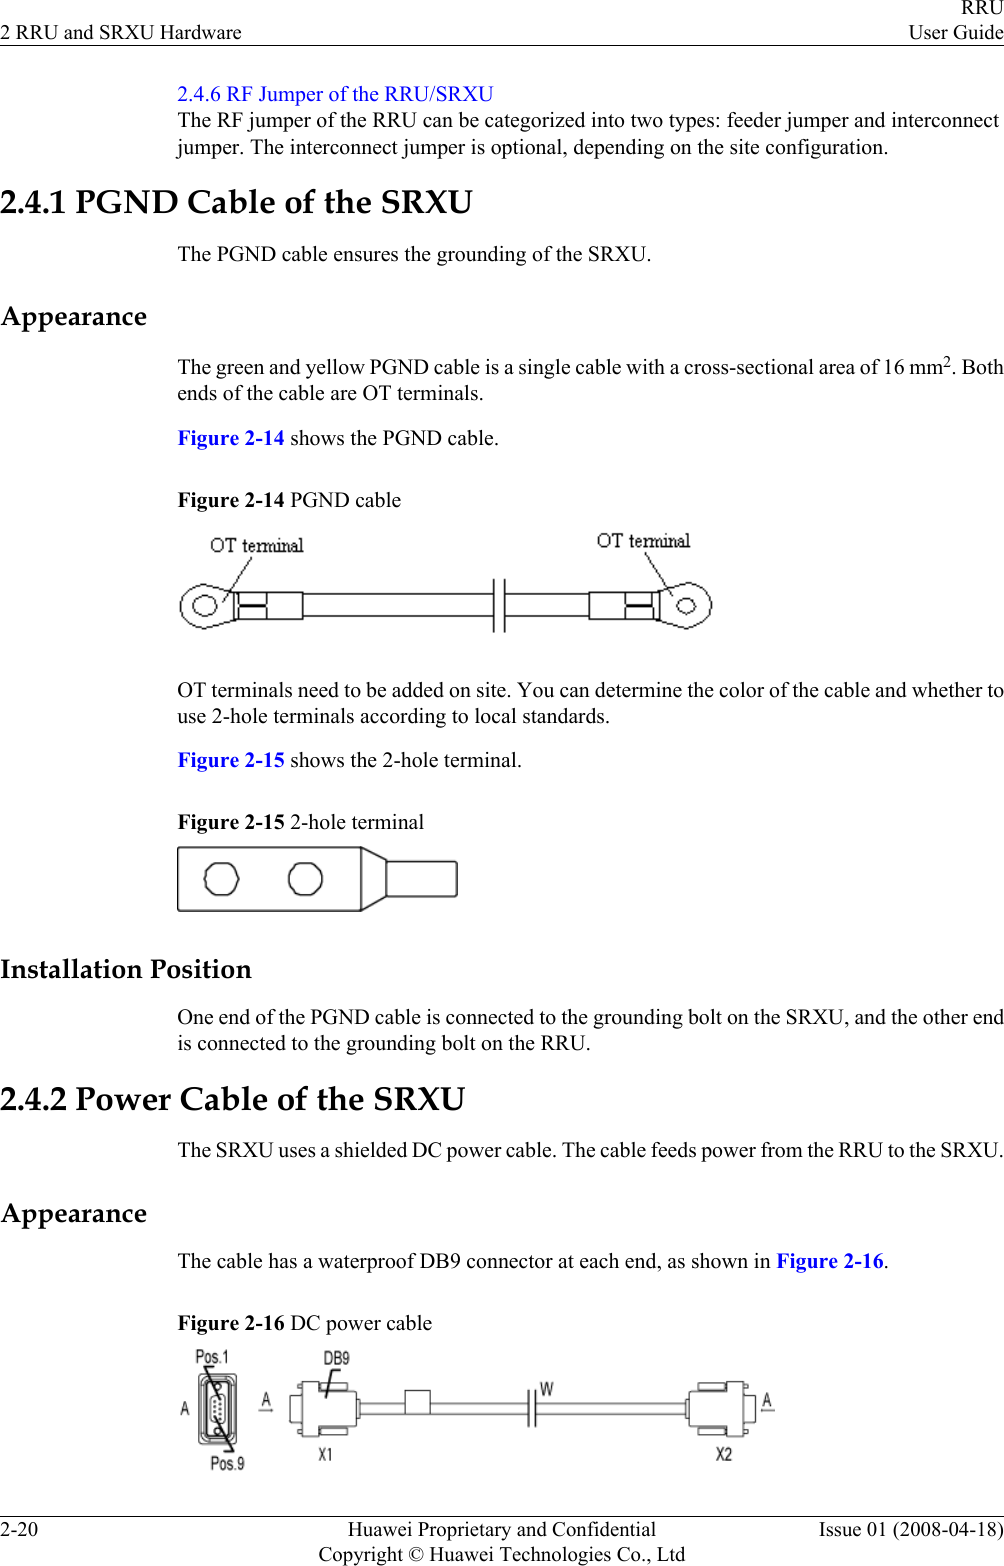 2.4.6 RF Jumper of the RRU/SRXUThe RF jumper of the RRU can be categorized into two types: feeder jumper and interconnectjumper. The interconnect jumper is optional, depending on the site configuration.2.4.1 PGND Cable of the SRXUThe PGND cable ensures the grounding of the SRXU.AppearanceThe green and yellow PGND cable is a single cable with a cross-sectional area of 16 mm2. Bothends of the cable are OT terminals.Figure 2-14 shows the PGND cable.Figure 2-14 PGND cableOT terminals need to be added on site. You can determine the color of the cable and whether touse 2-hole terminals according to local standards.Figure 2-15 shows the 2-hole terminal.Figure 2-15 2-hole terminalInstallation PositionOne end of the PGND cable is connected to the grounding bolt on the SRXU, and the other endis connected to the grounding bolt on the RRU.2.4.2 Power Cable of the SRXUThe SRXU uses a shielded DC power cable. The cable feeds power from the RRU to the SRXU.AppearanceThe cable has a waterproof DB9 connector at each end, as shown in Figure 2-16.Figure 2-16 DC power cable2 RRU and SRXU HardwareRRUUser Guide2-20 Huawei Proprietary and ConfidentialCopyright © Huawei Technologies Co., LtdIssue 01 (2008-04-18)